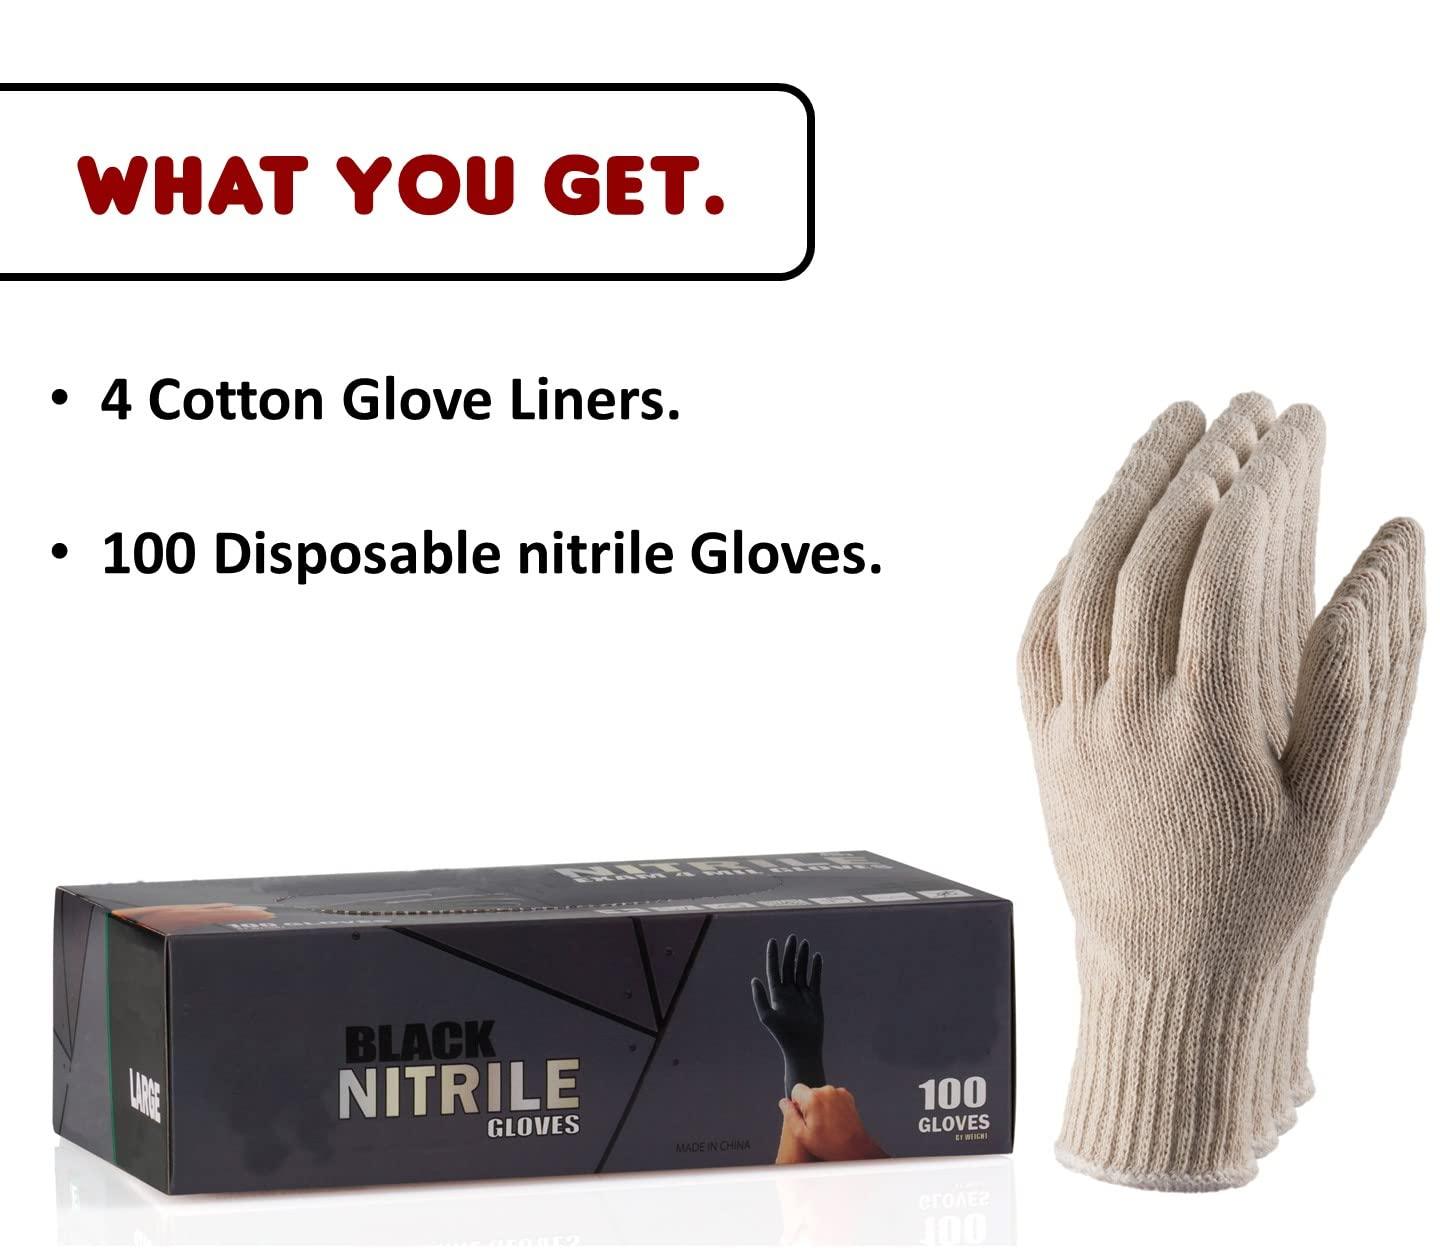 Nechtik BBQ Gloves disposable - 4 Cotton Glove Liners and 100 Disposable Gloves - Machine Washable Cotton Liners - Powder Free, Latex Free Black Nitrile Gloves (100, XL) - CookCave